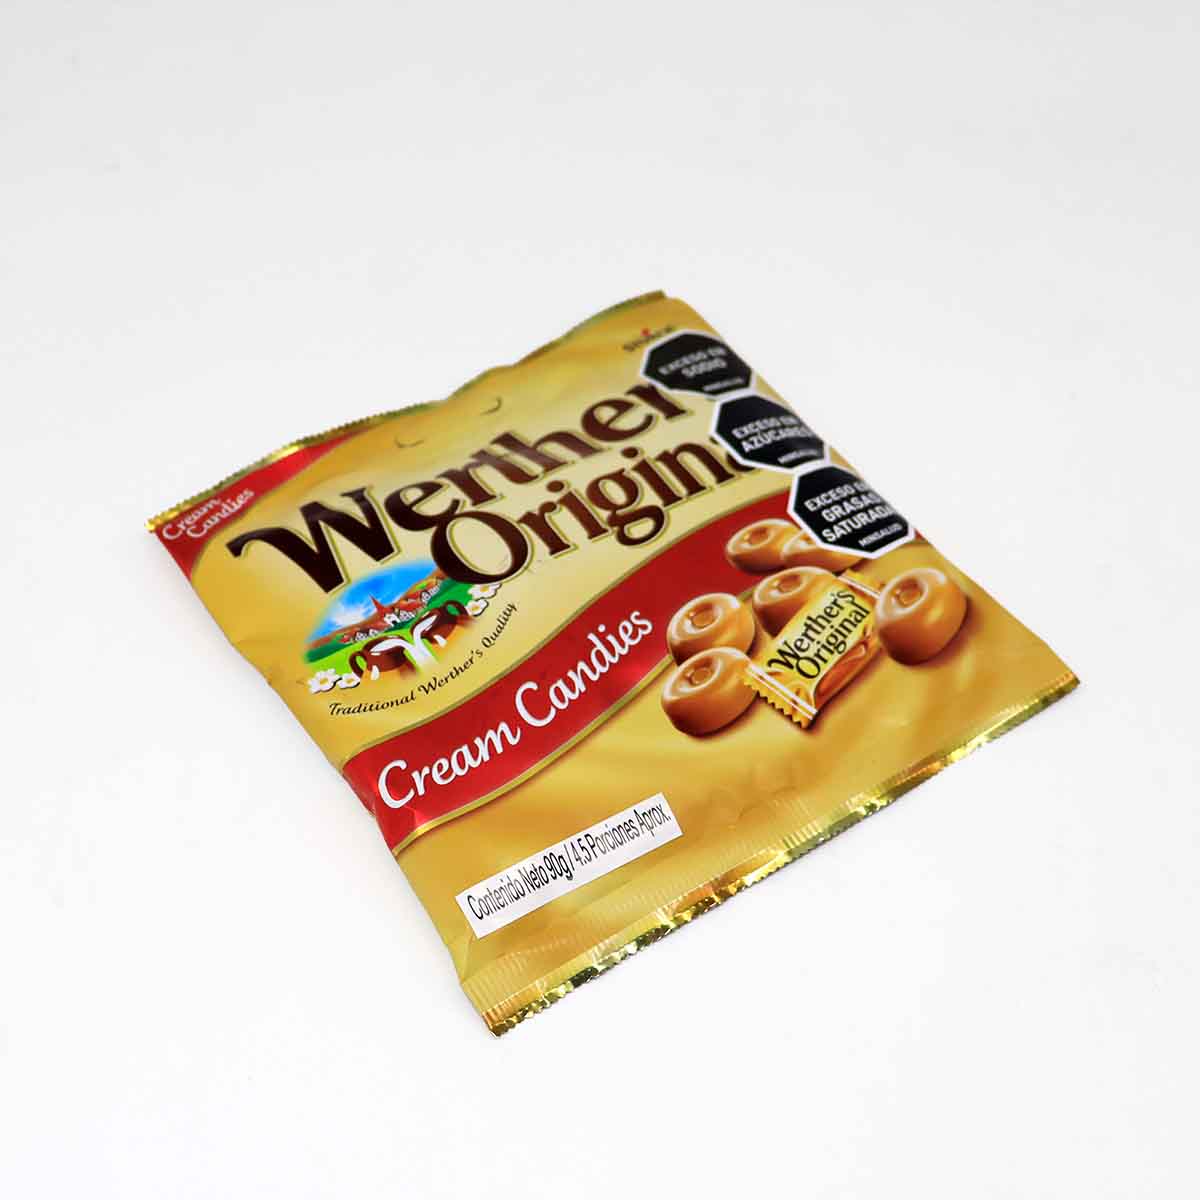 DULCES CARAMELO WERTHERS 90g